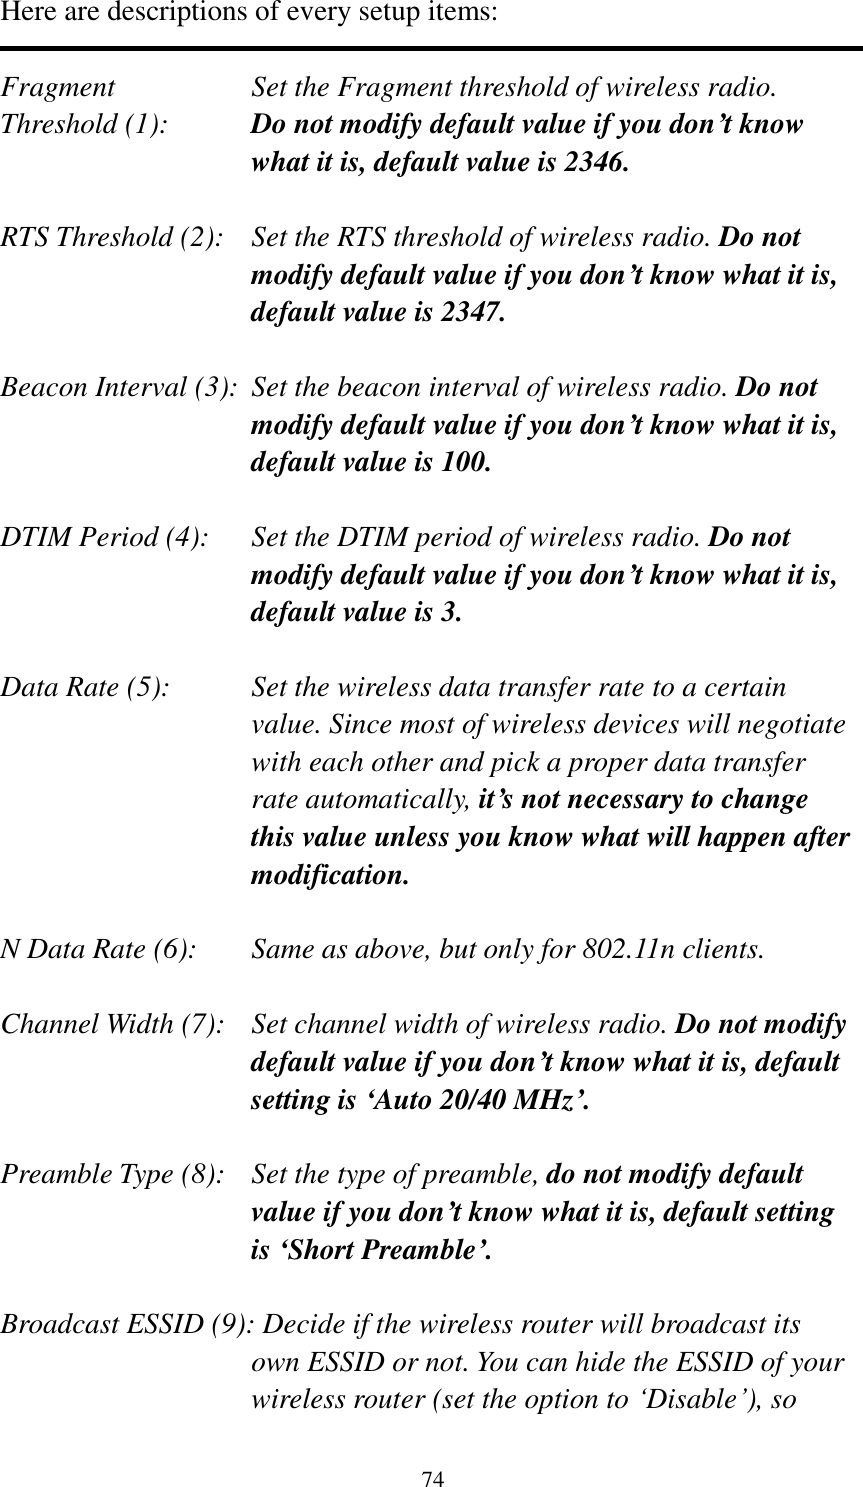 74 Here are descriptions of every setup items:  Fragment  Set the Fragment threshold of wireless radio.    Threshold (1):  Do not modify default value if you don’t know what it is, default value is 2346.  RTS Threshold (2):    Set the RTS threshold of wireless radio. Do not modify default value if you don’t know what it is, default value is 2347.  Beacon Interval (3):  Set the beacon interval of wireless radio. Do not modify default value if you don’t know what it is, default value is 100.  DTIM Period (4):    Set the DTIM period of wireless radio. Do not modify default value if you don’t know what it is, default value is 3.  Data Rate (5):    Set the wireless data transfer rate to a certain value. Since most of wireless devices will negotiate with each other and pick a proper data transfer rate automatically, it’s not necessary to change this value unless you know what will happen after modification.  N Data Rate (6):   Same as above, but only for 802.11n clients.  Channel Width (7):   Set channel width of wireless radio. Do not modify default value if you don’t know what it is, default setting is ‘Auto 20/40 MHz’.  Preamble Type (8):   Set the type of preamble, do not modify default value if you don’t know what it is, default setting is ‘Short Preamble’.  Broadcast ESSID (9): Decide if the wireless router will broadcast its own ESSID or not. You can hide the ESSID of your wireless router (set the option to „Disable‟), so 